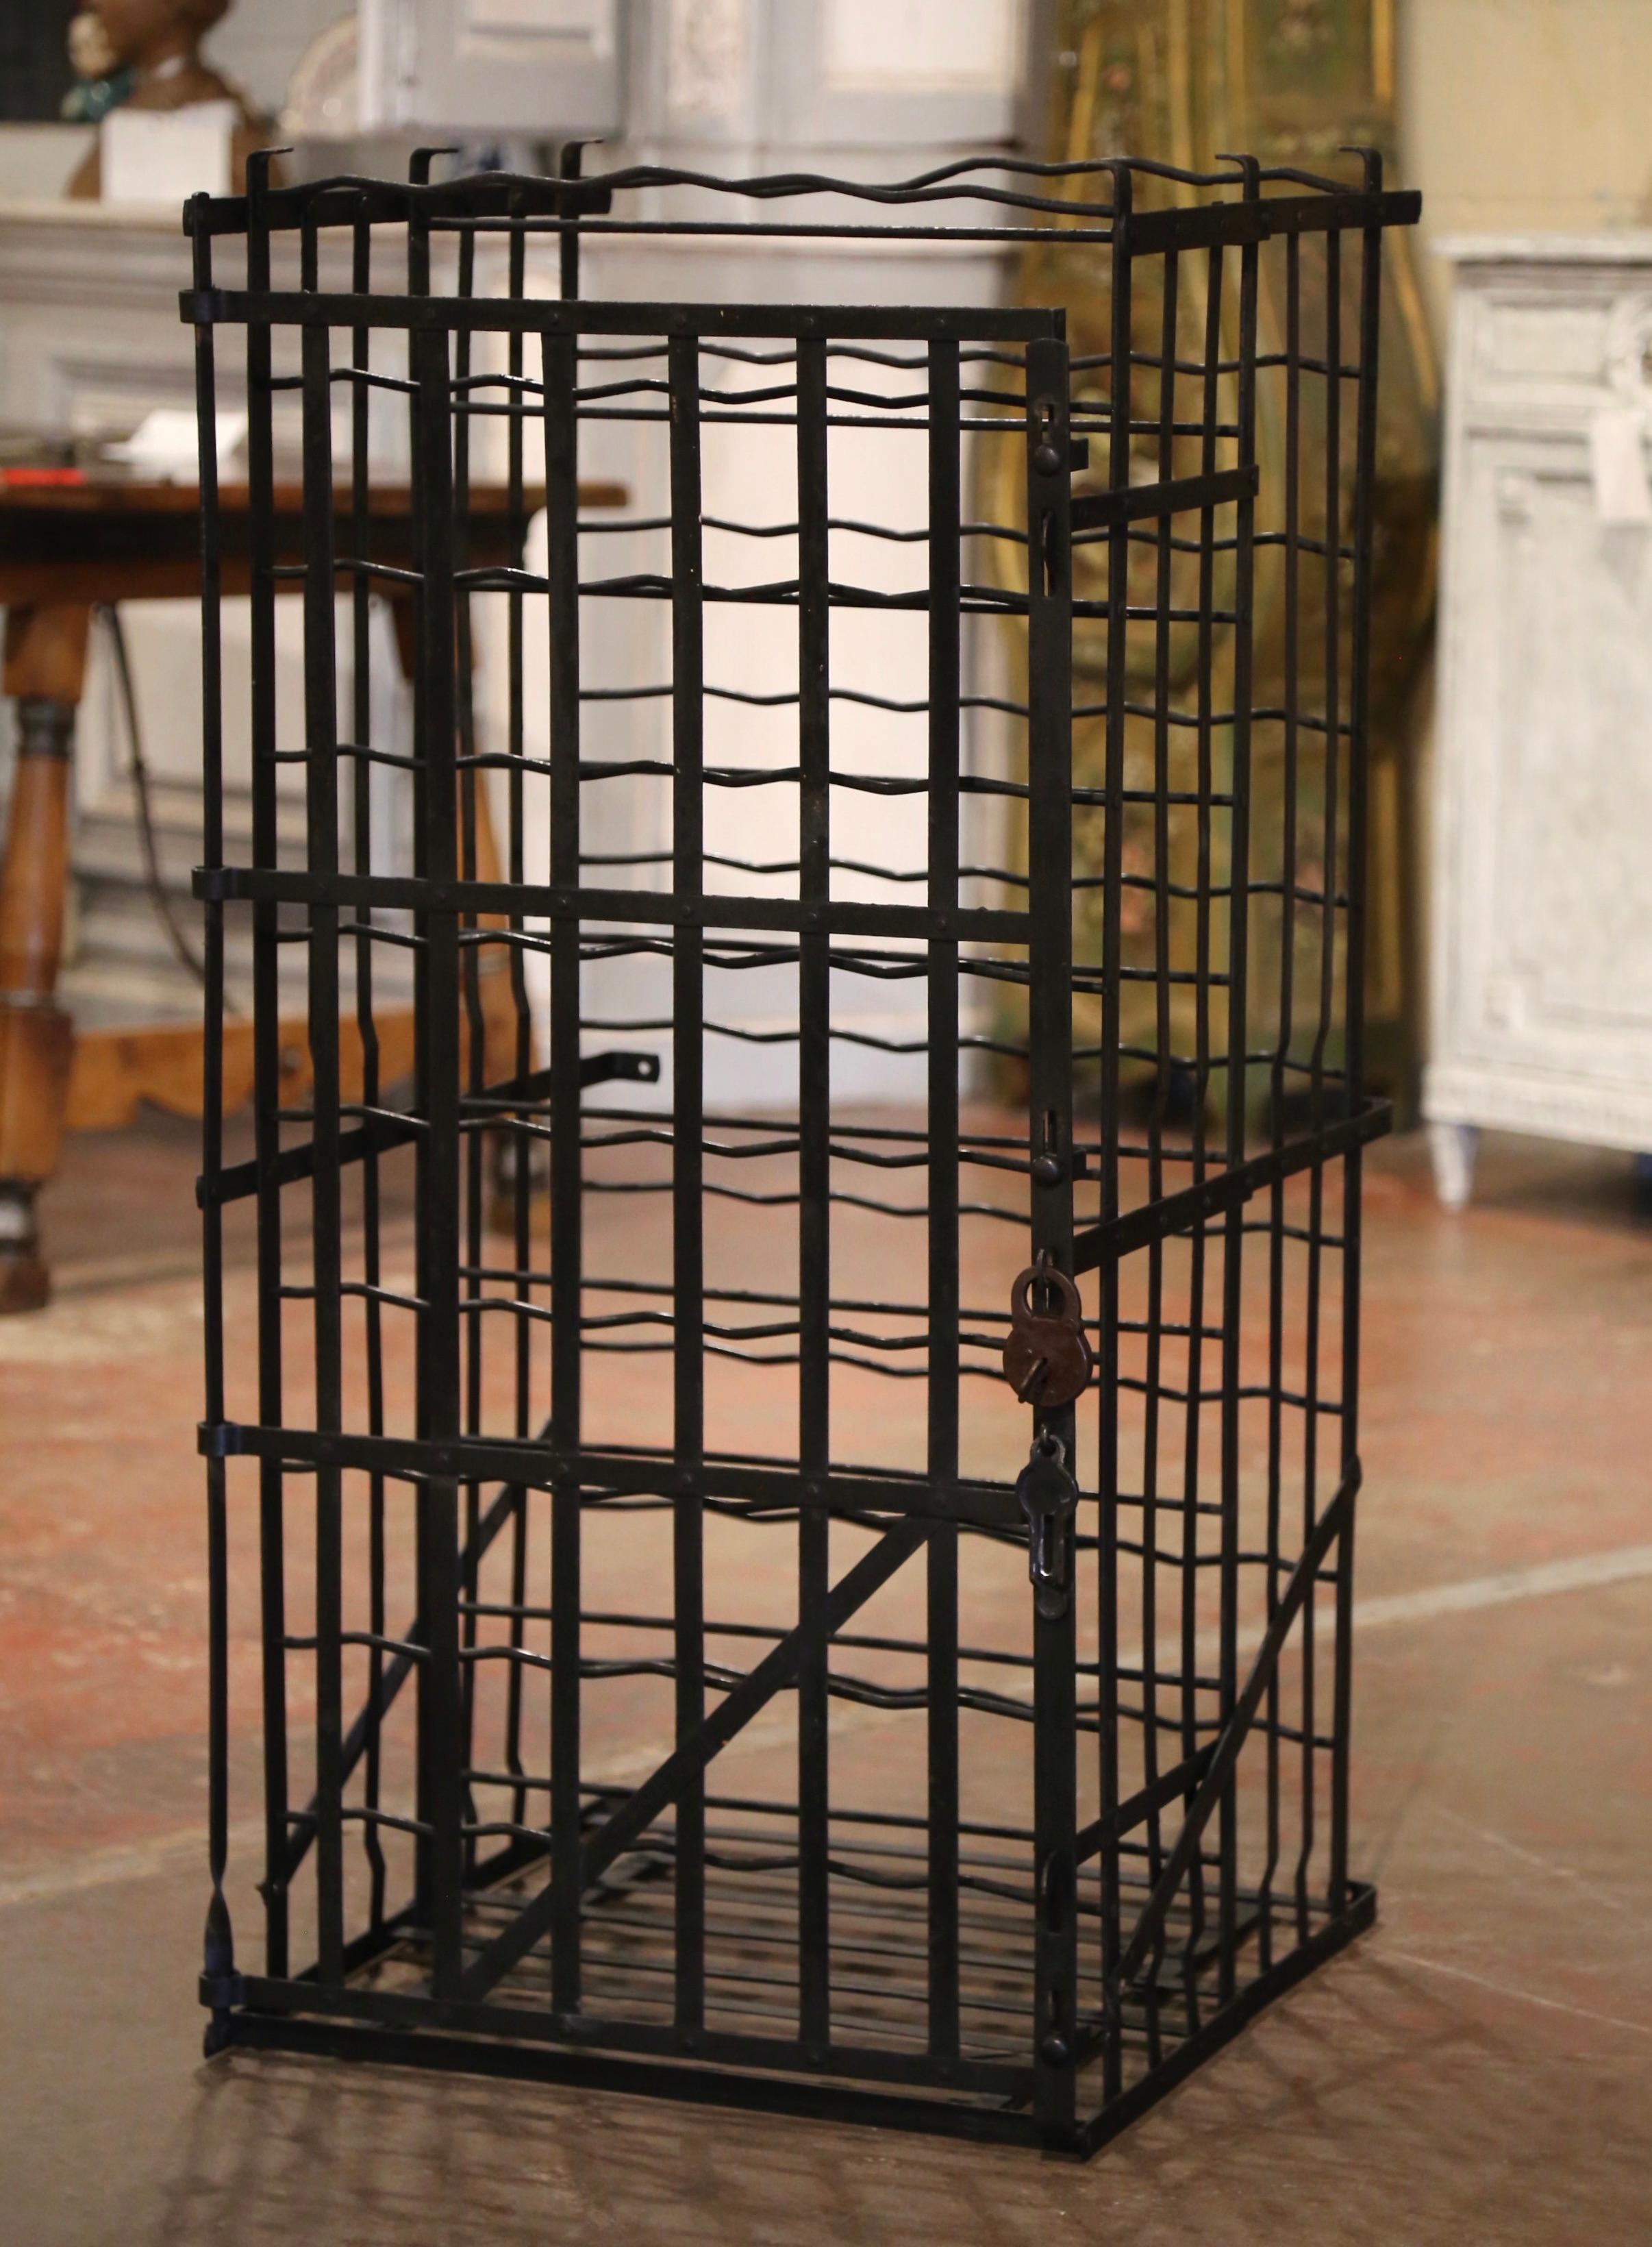 Forged 19th Century French Iron Seventy Two-Bottle Wine Cellar Rack Cage from Burgundy For Sale